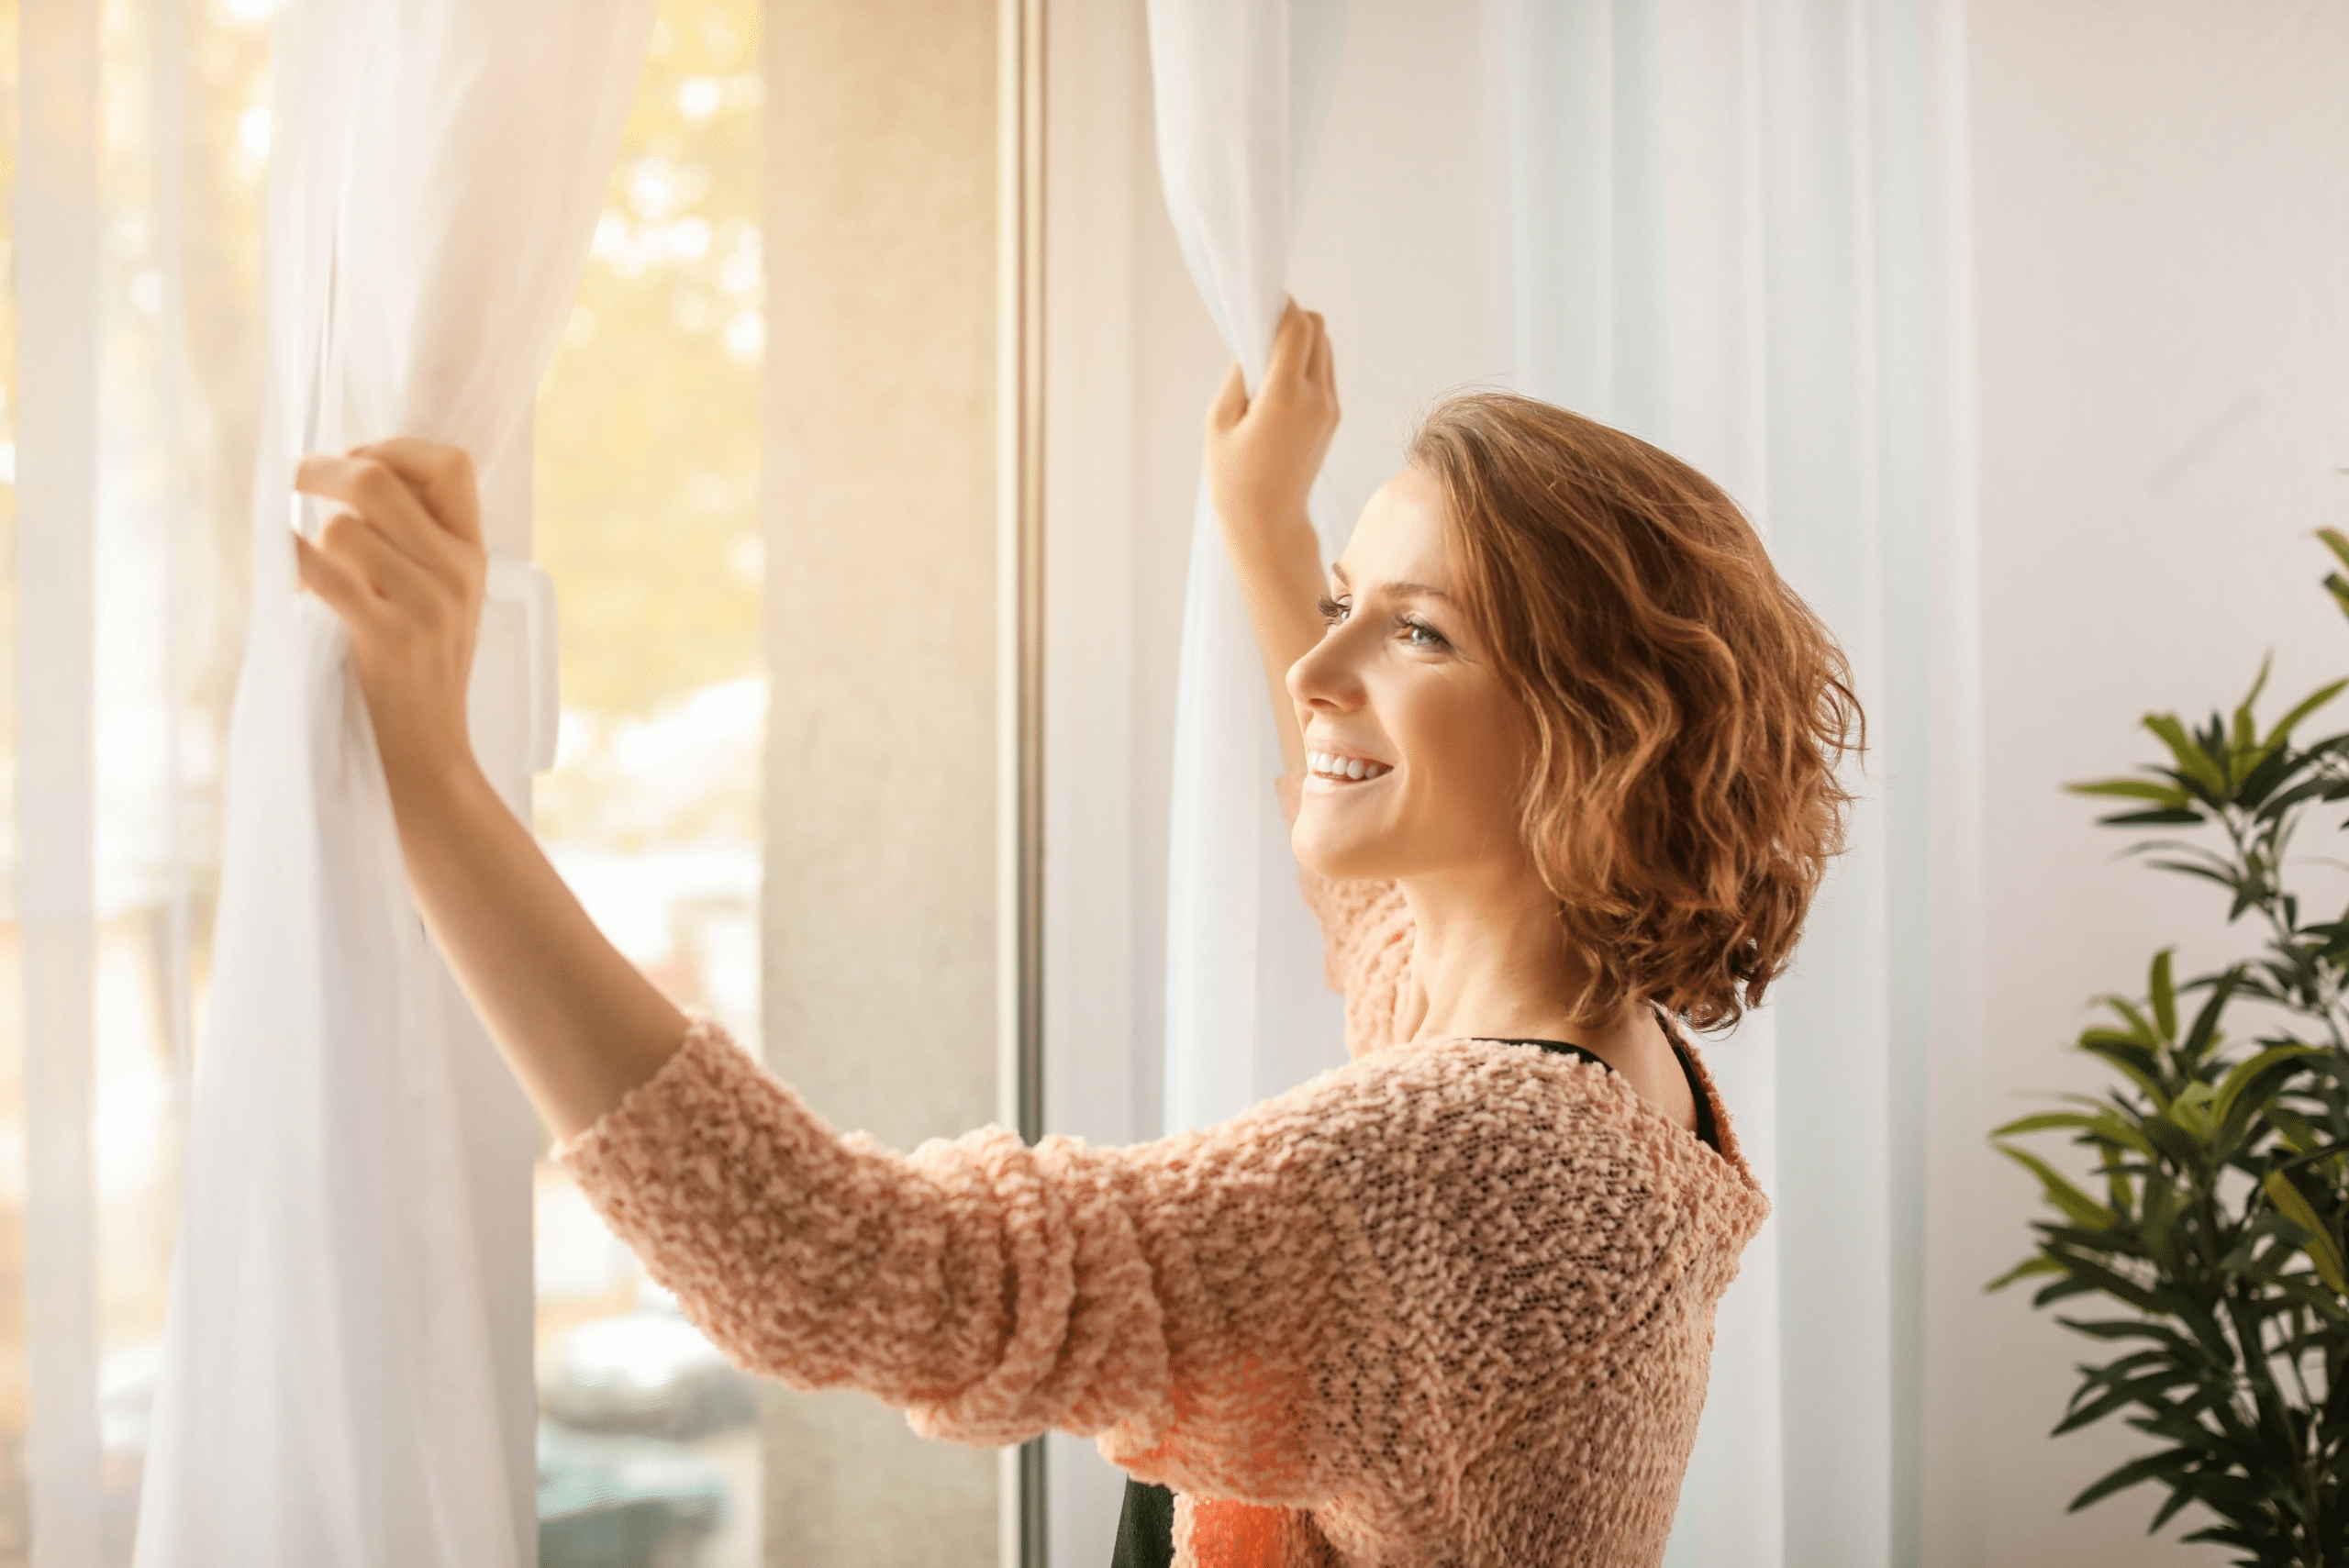 Person opening curtains to access window.